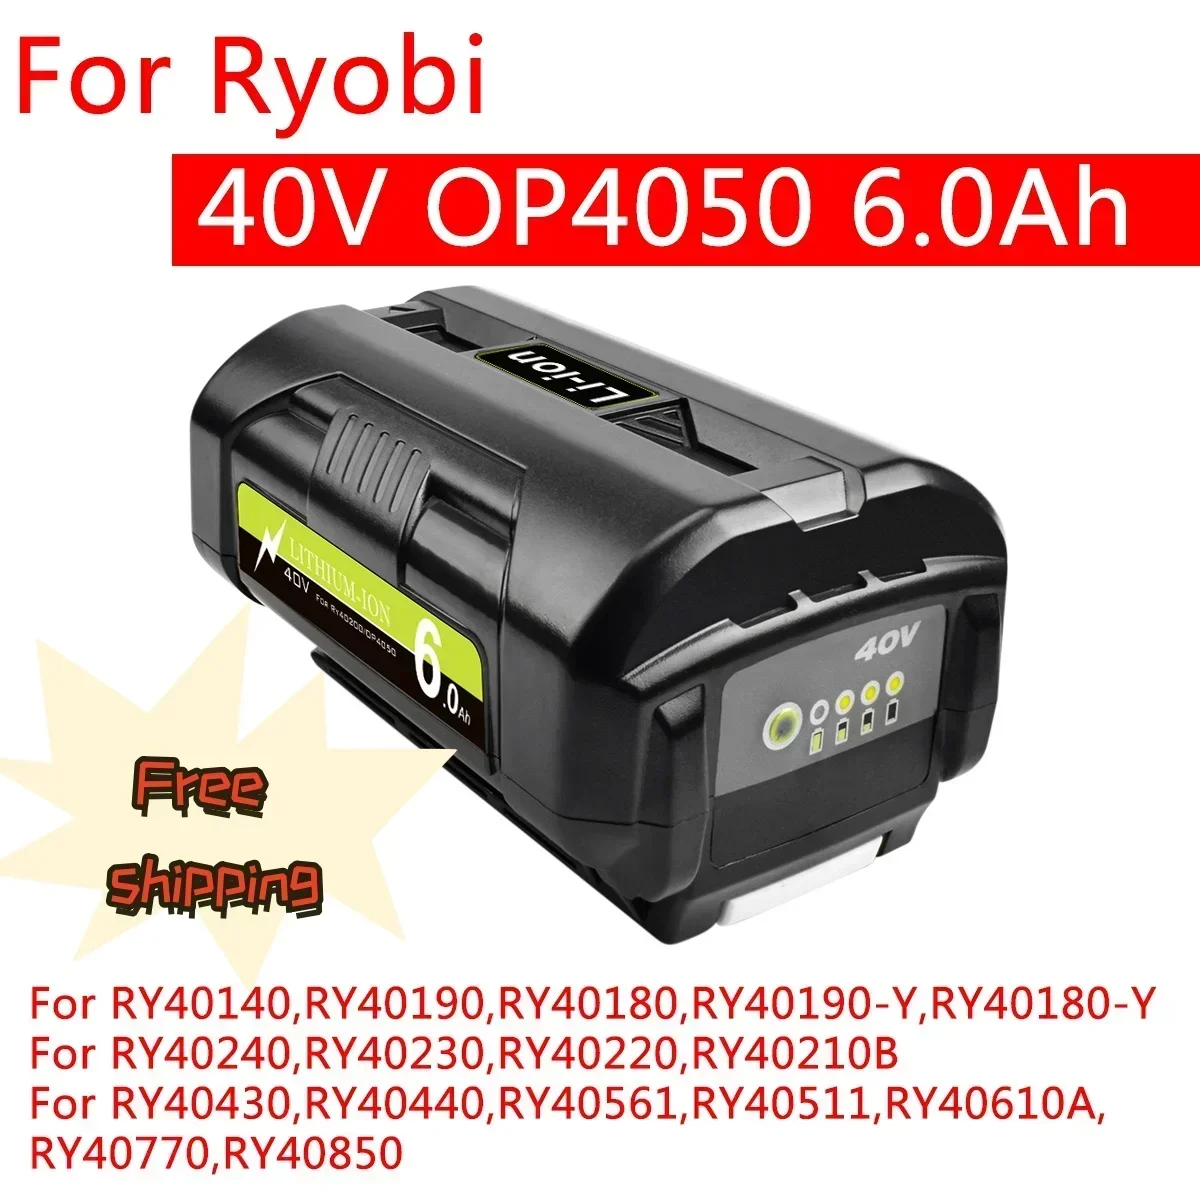 

For Ryobi 6.0Ah 40V Li-Ion Rechargeable Battery For Ryobi RY40502 RY40200 40V Cordless Power Tools Battery OP4050 OP4026 OP40401